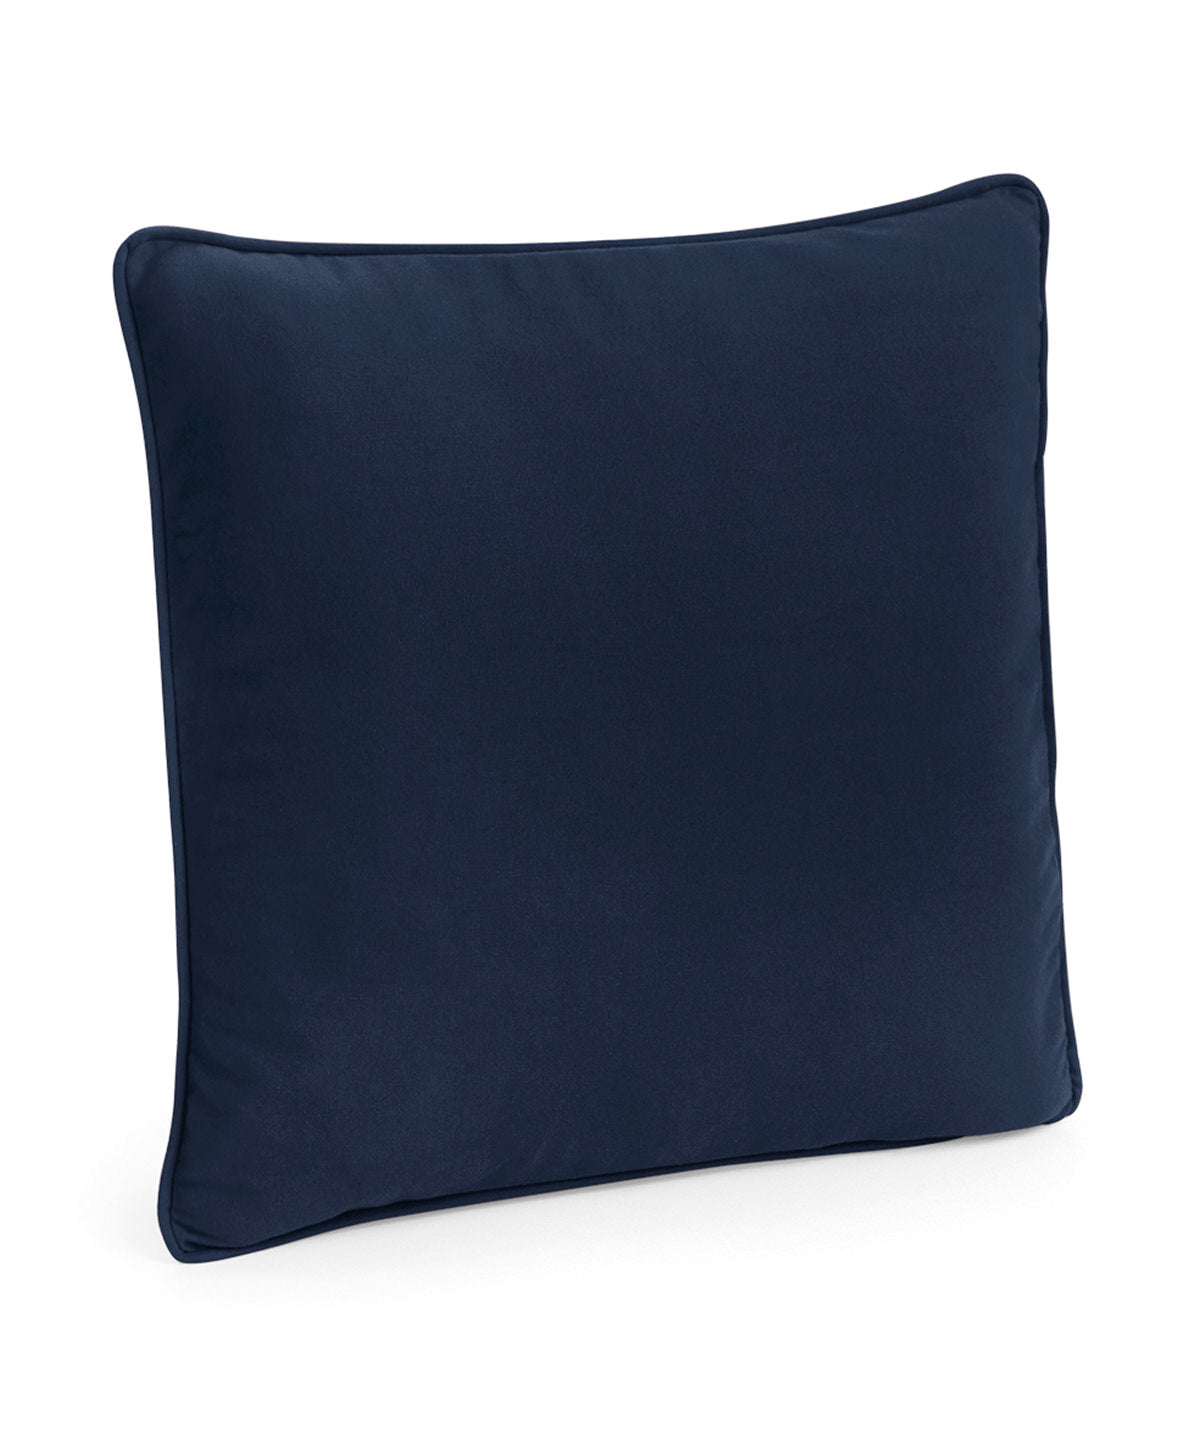 Contrast Piping Cushion Cover - Natural/French Navy